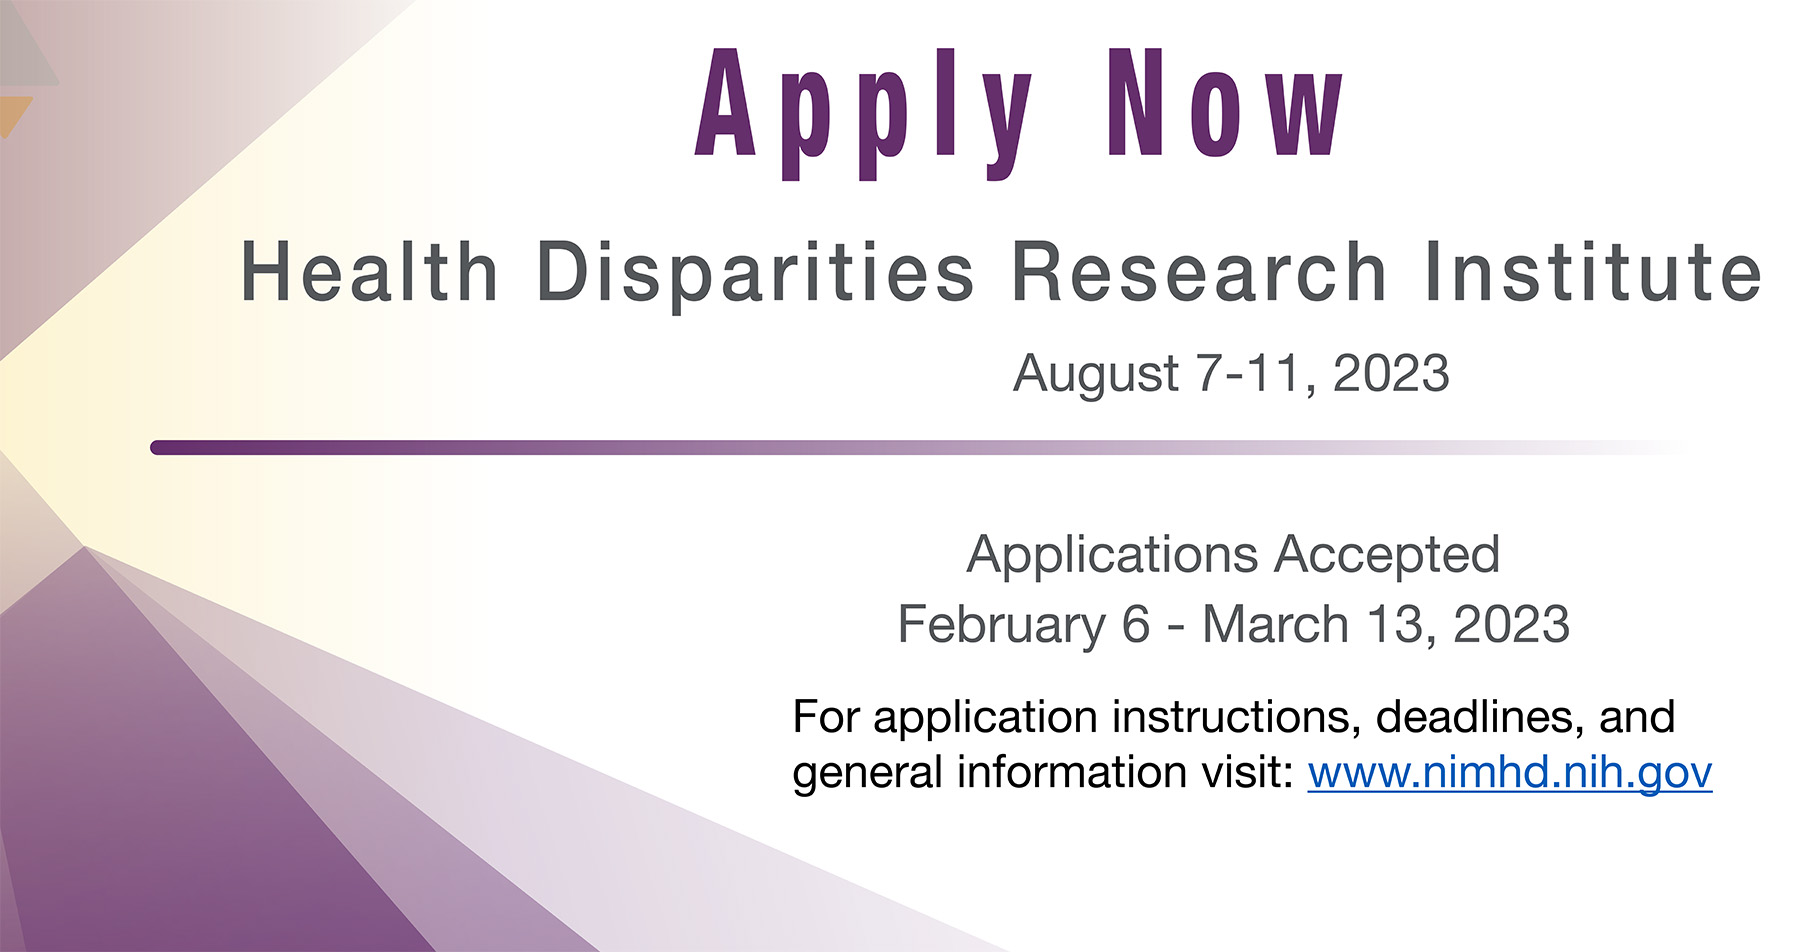 Apply now through March 13: NIMHD's Health Disparities Research Institute (August 7-11, 2023)